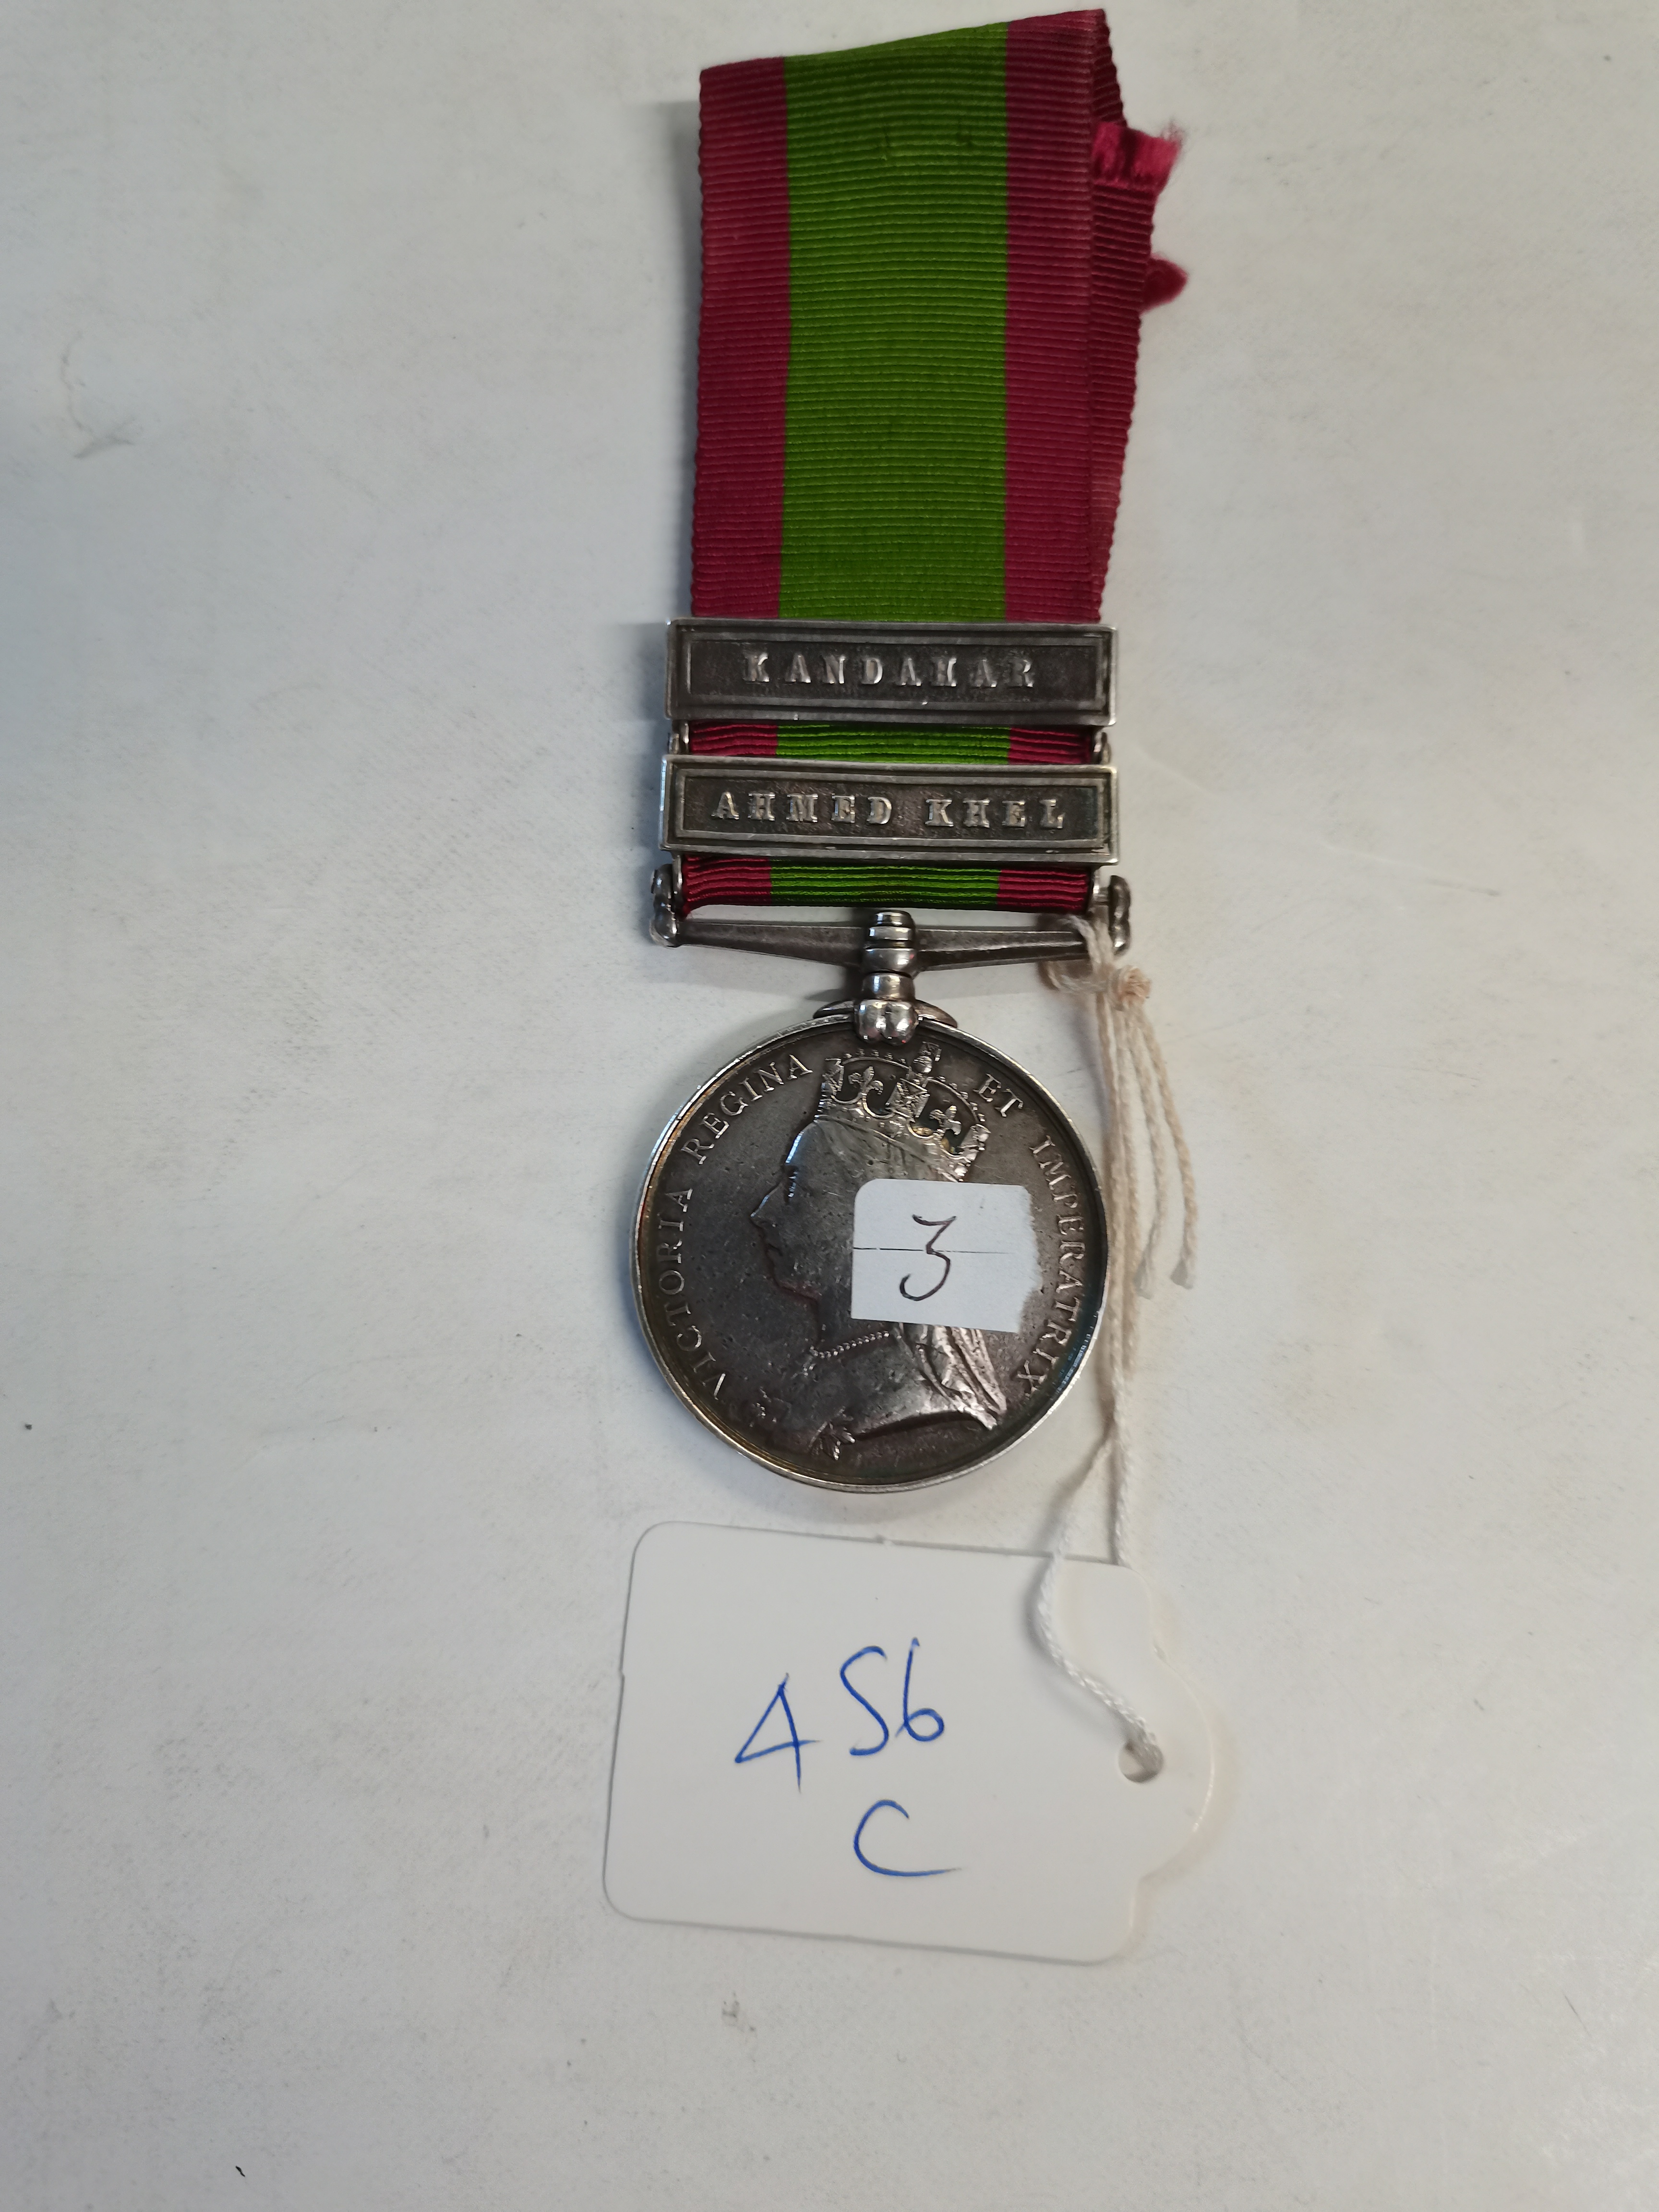 Afganistan 1878 medal with 2 x clasps to 7515 PTE. F. TOE 2/60TH